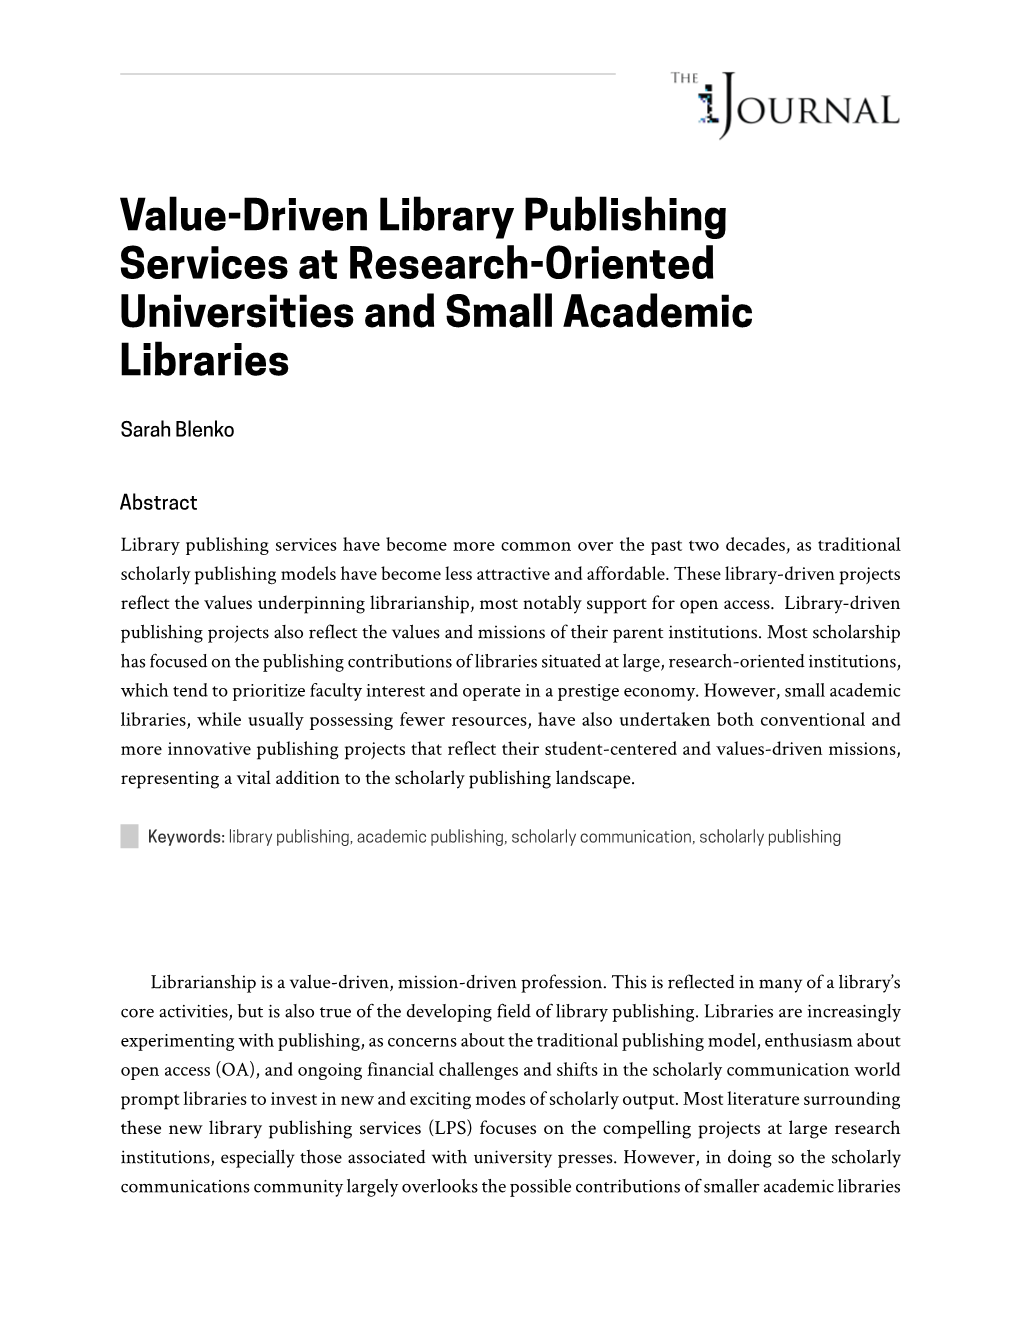 Value-Driven Library Publishing Services at Research-Oriented Universities and Small Academic Libraries